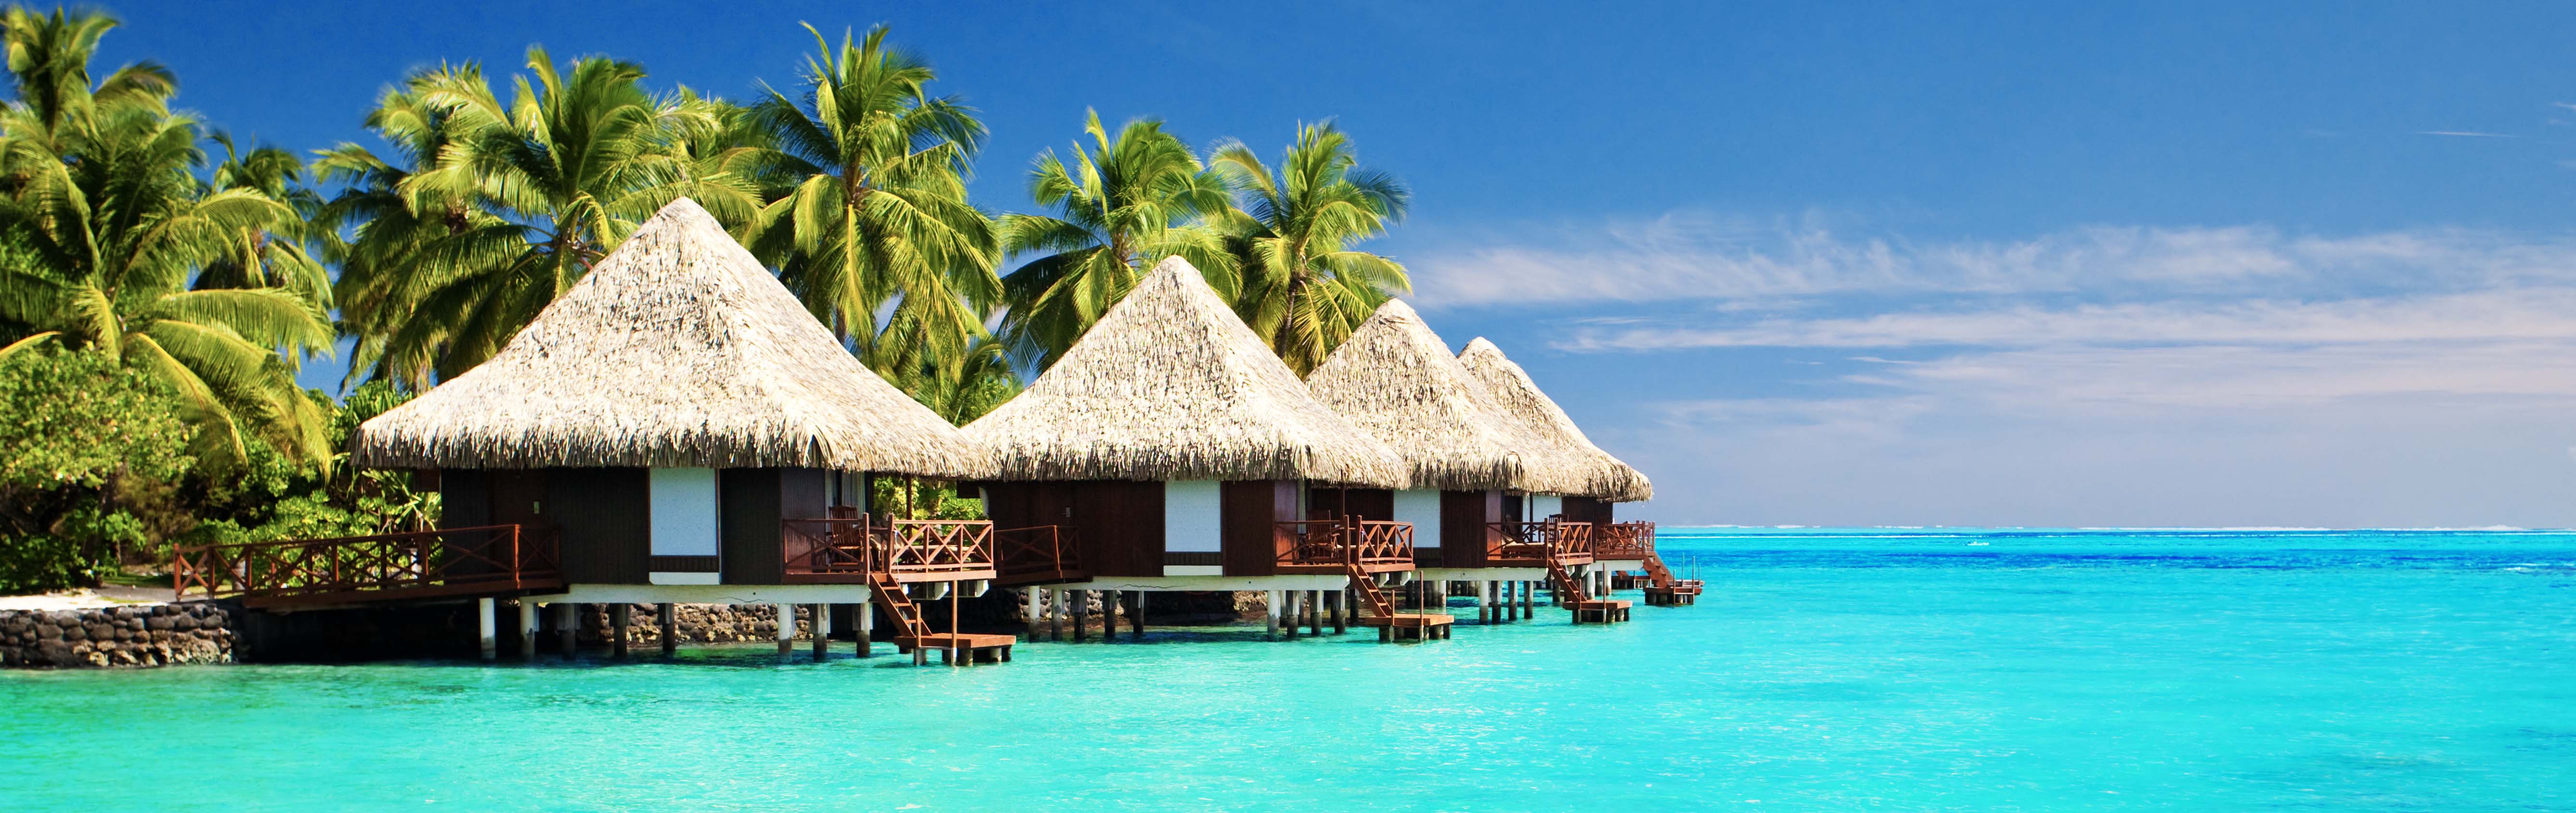 9 Overwater Bungalows Closer Than the South Pacific - SmarterTravel